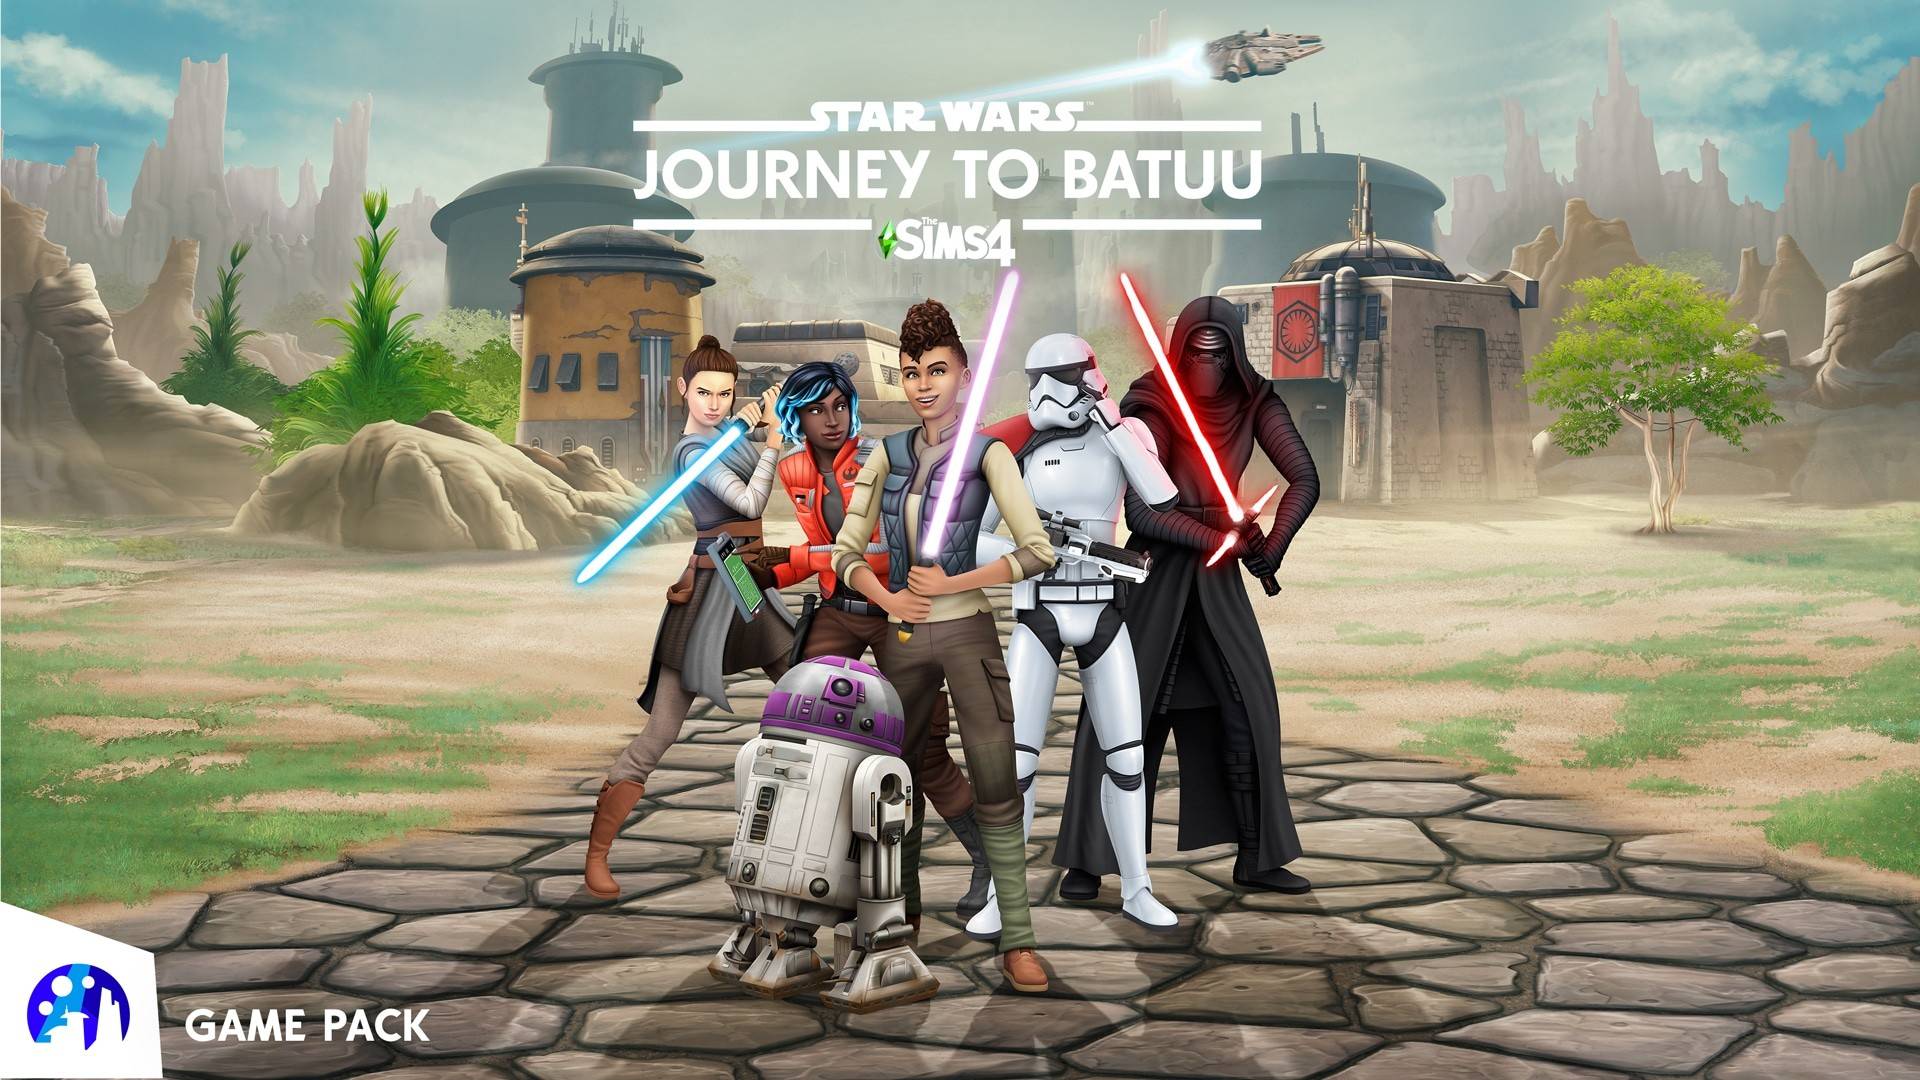 The Sims 4 - Star Wars: Journey to Batuu is the next expansion for The Sims 4